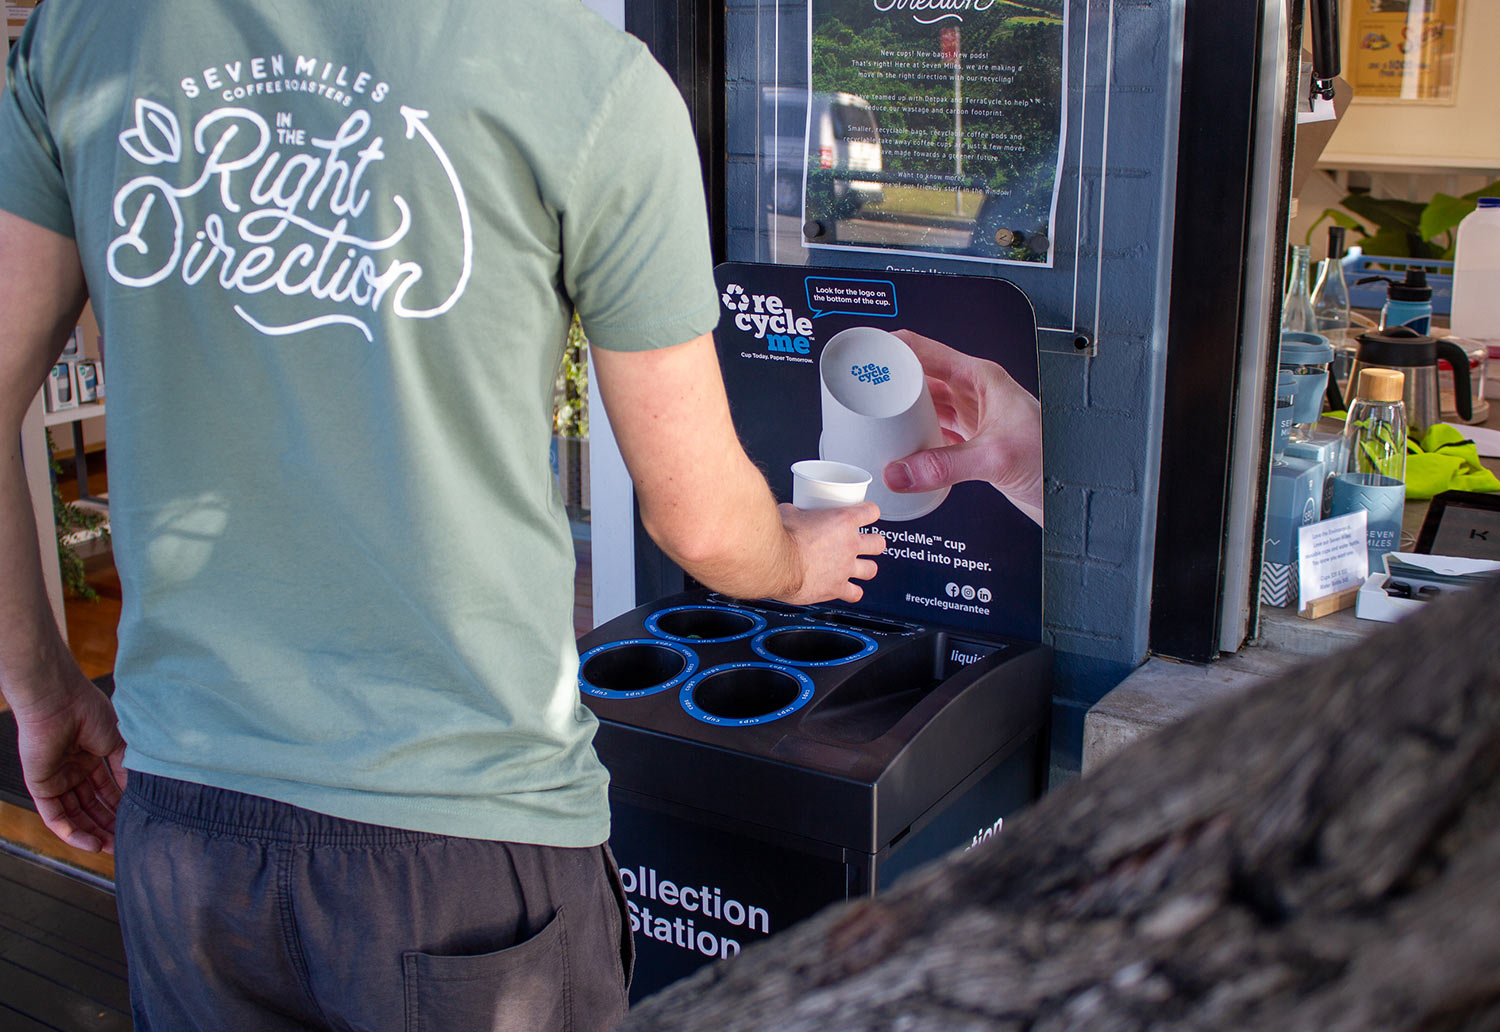 Image of Seven Miles RecycleMe cup being placed in a collection station 